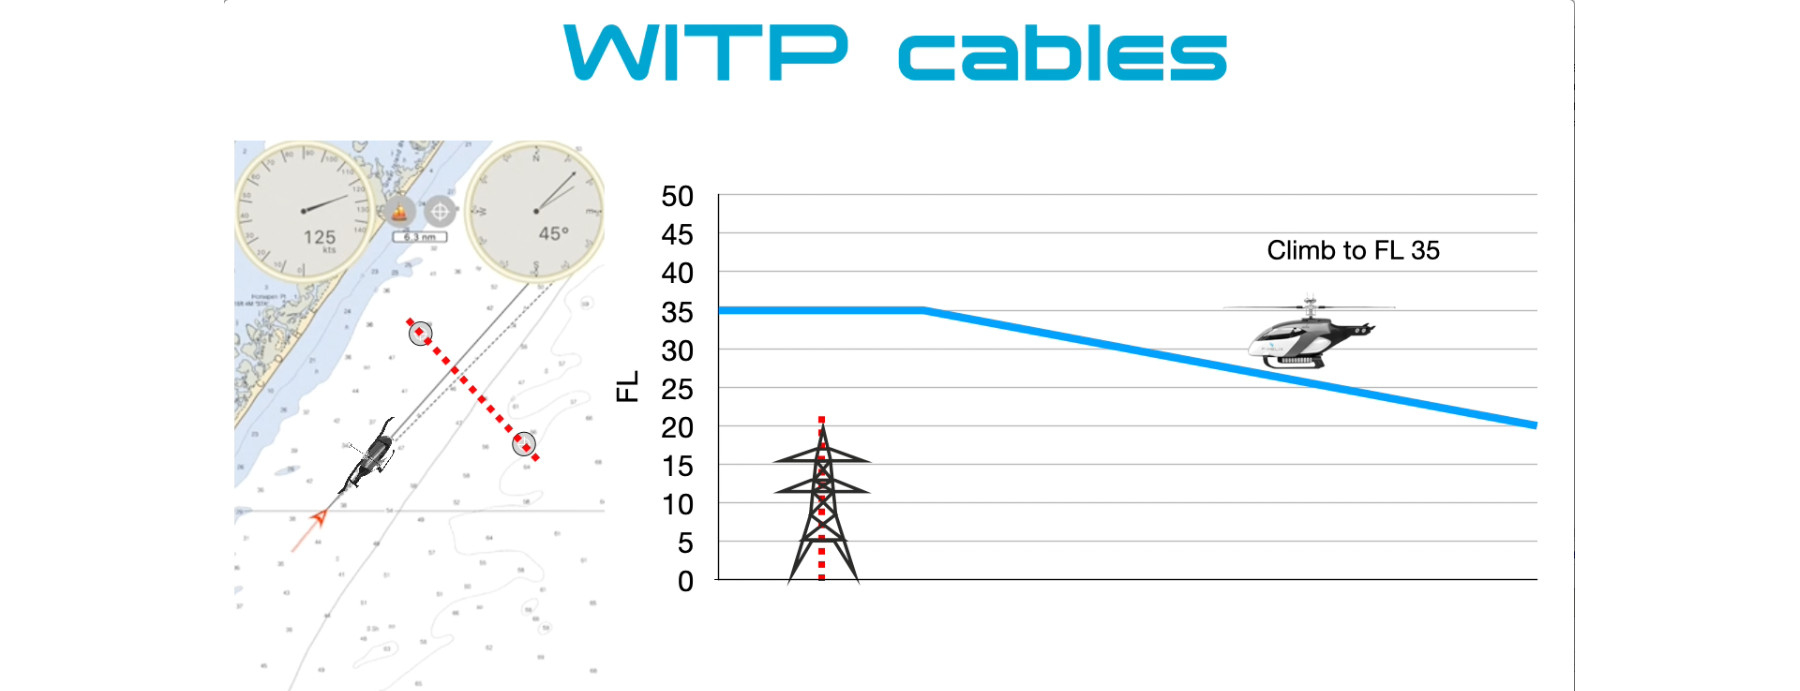 WITP Cables